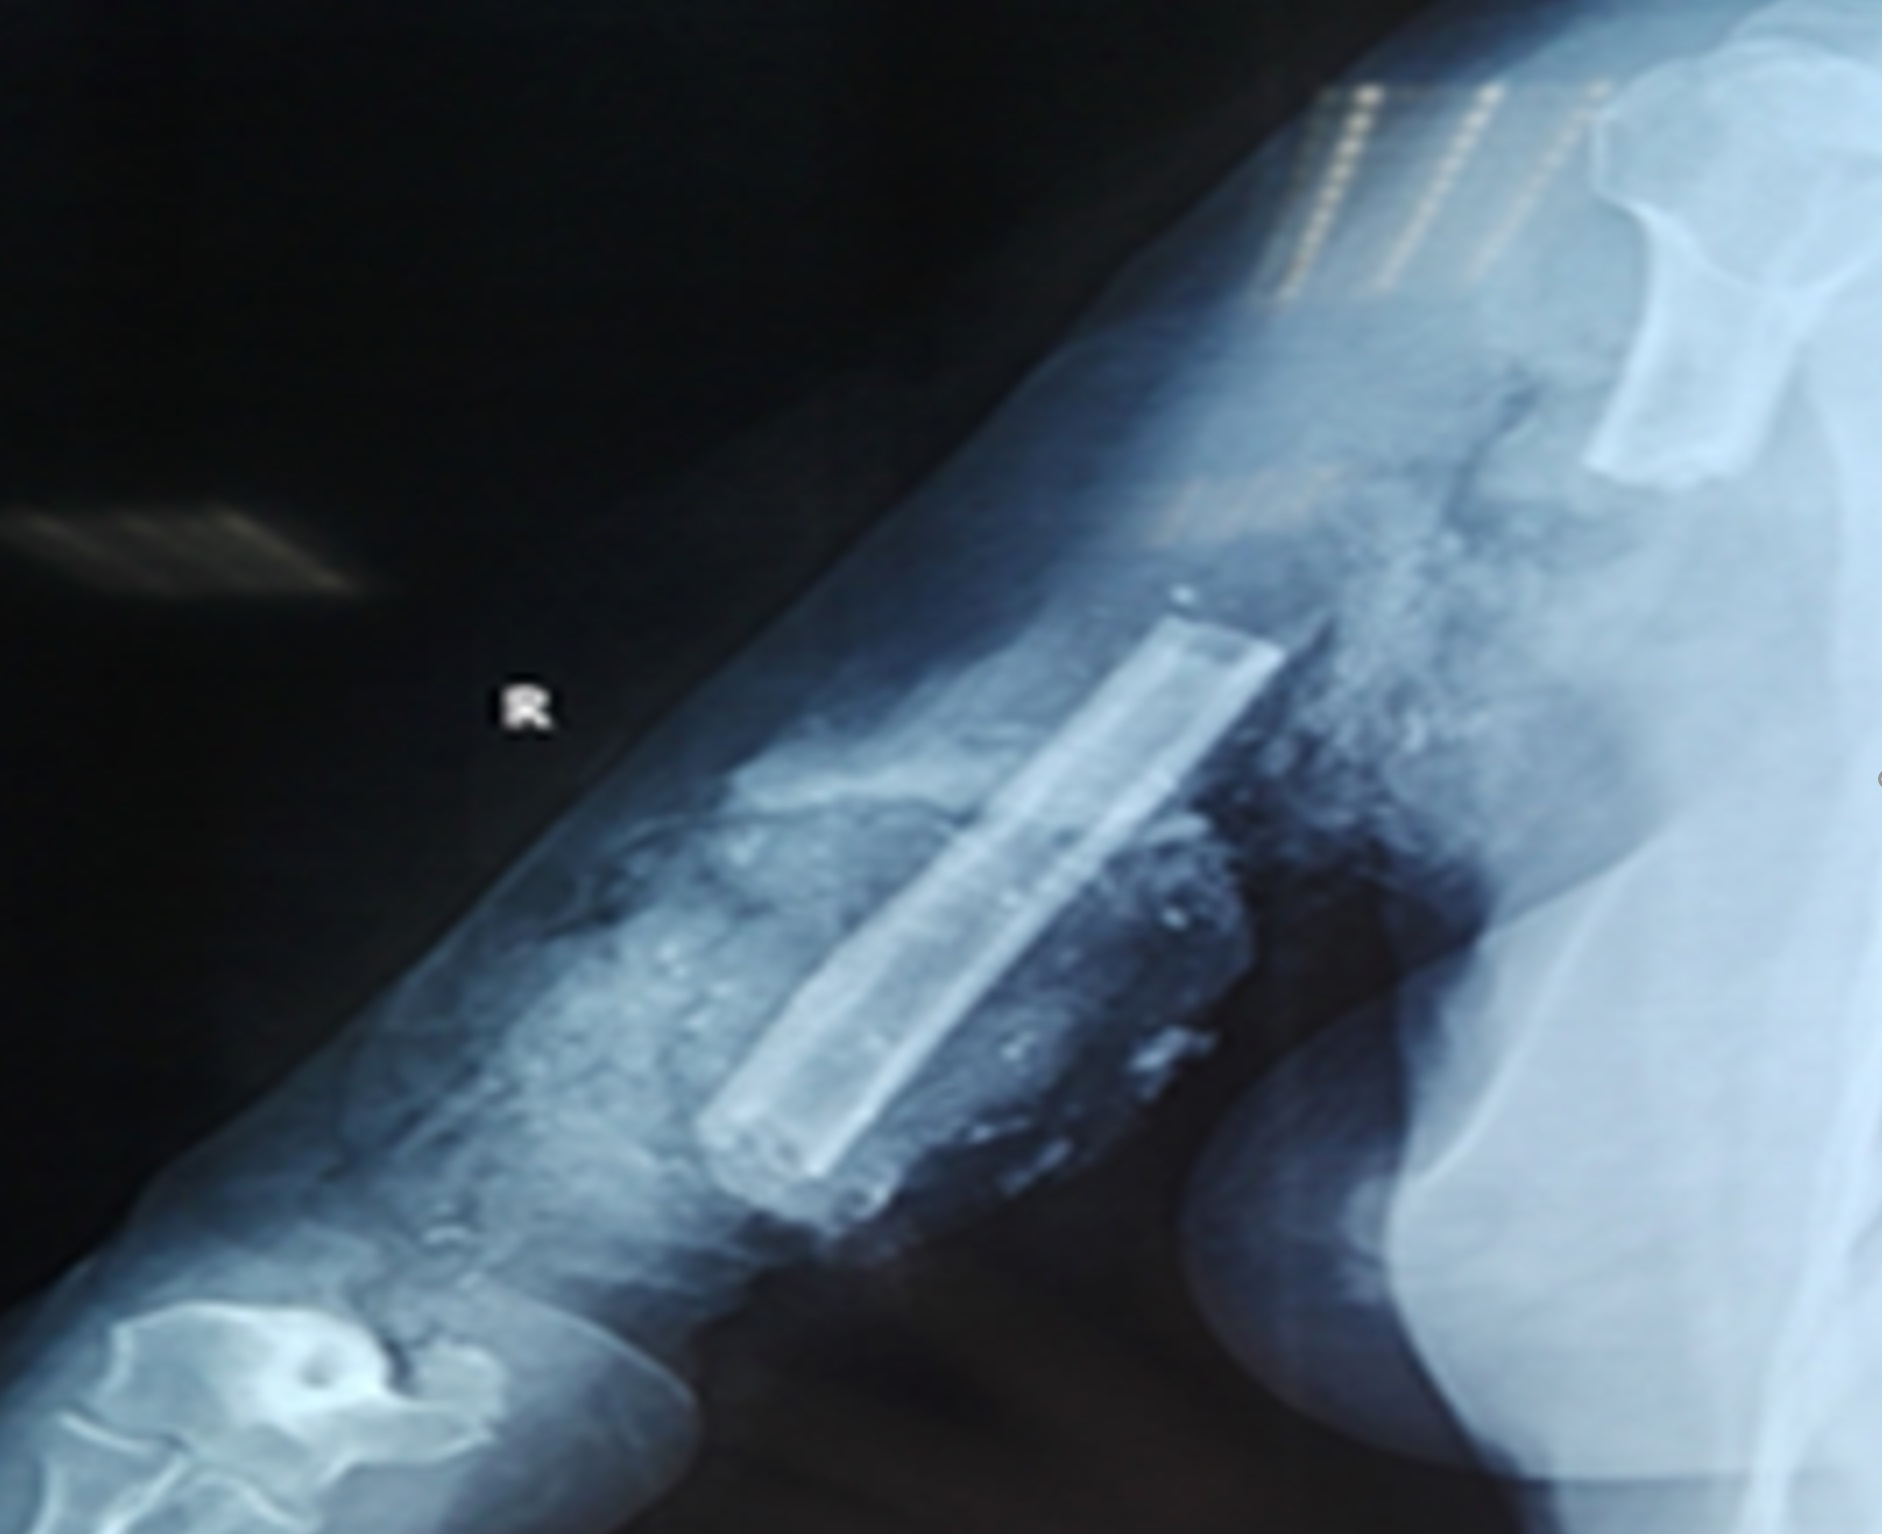 Survival Analysis of Upper Arm Replantation After Avulsion Injuries